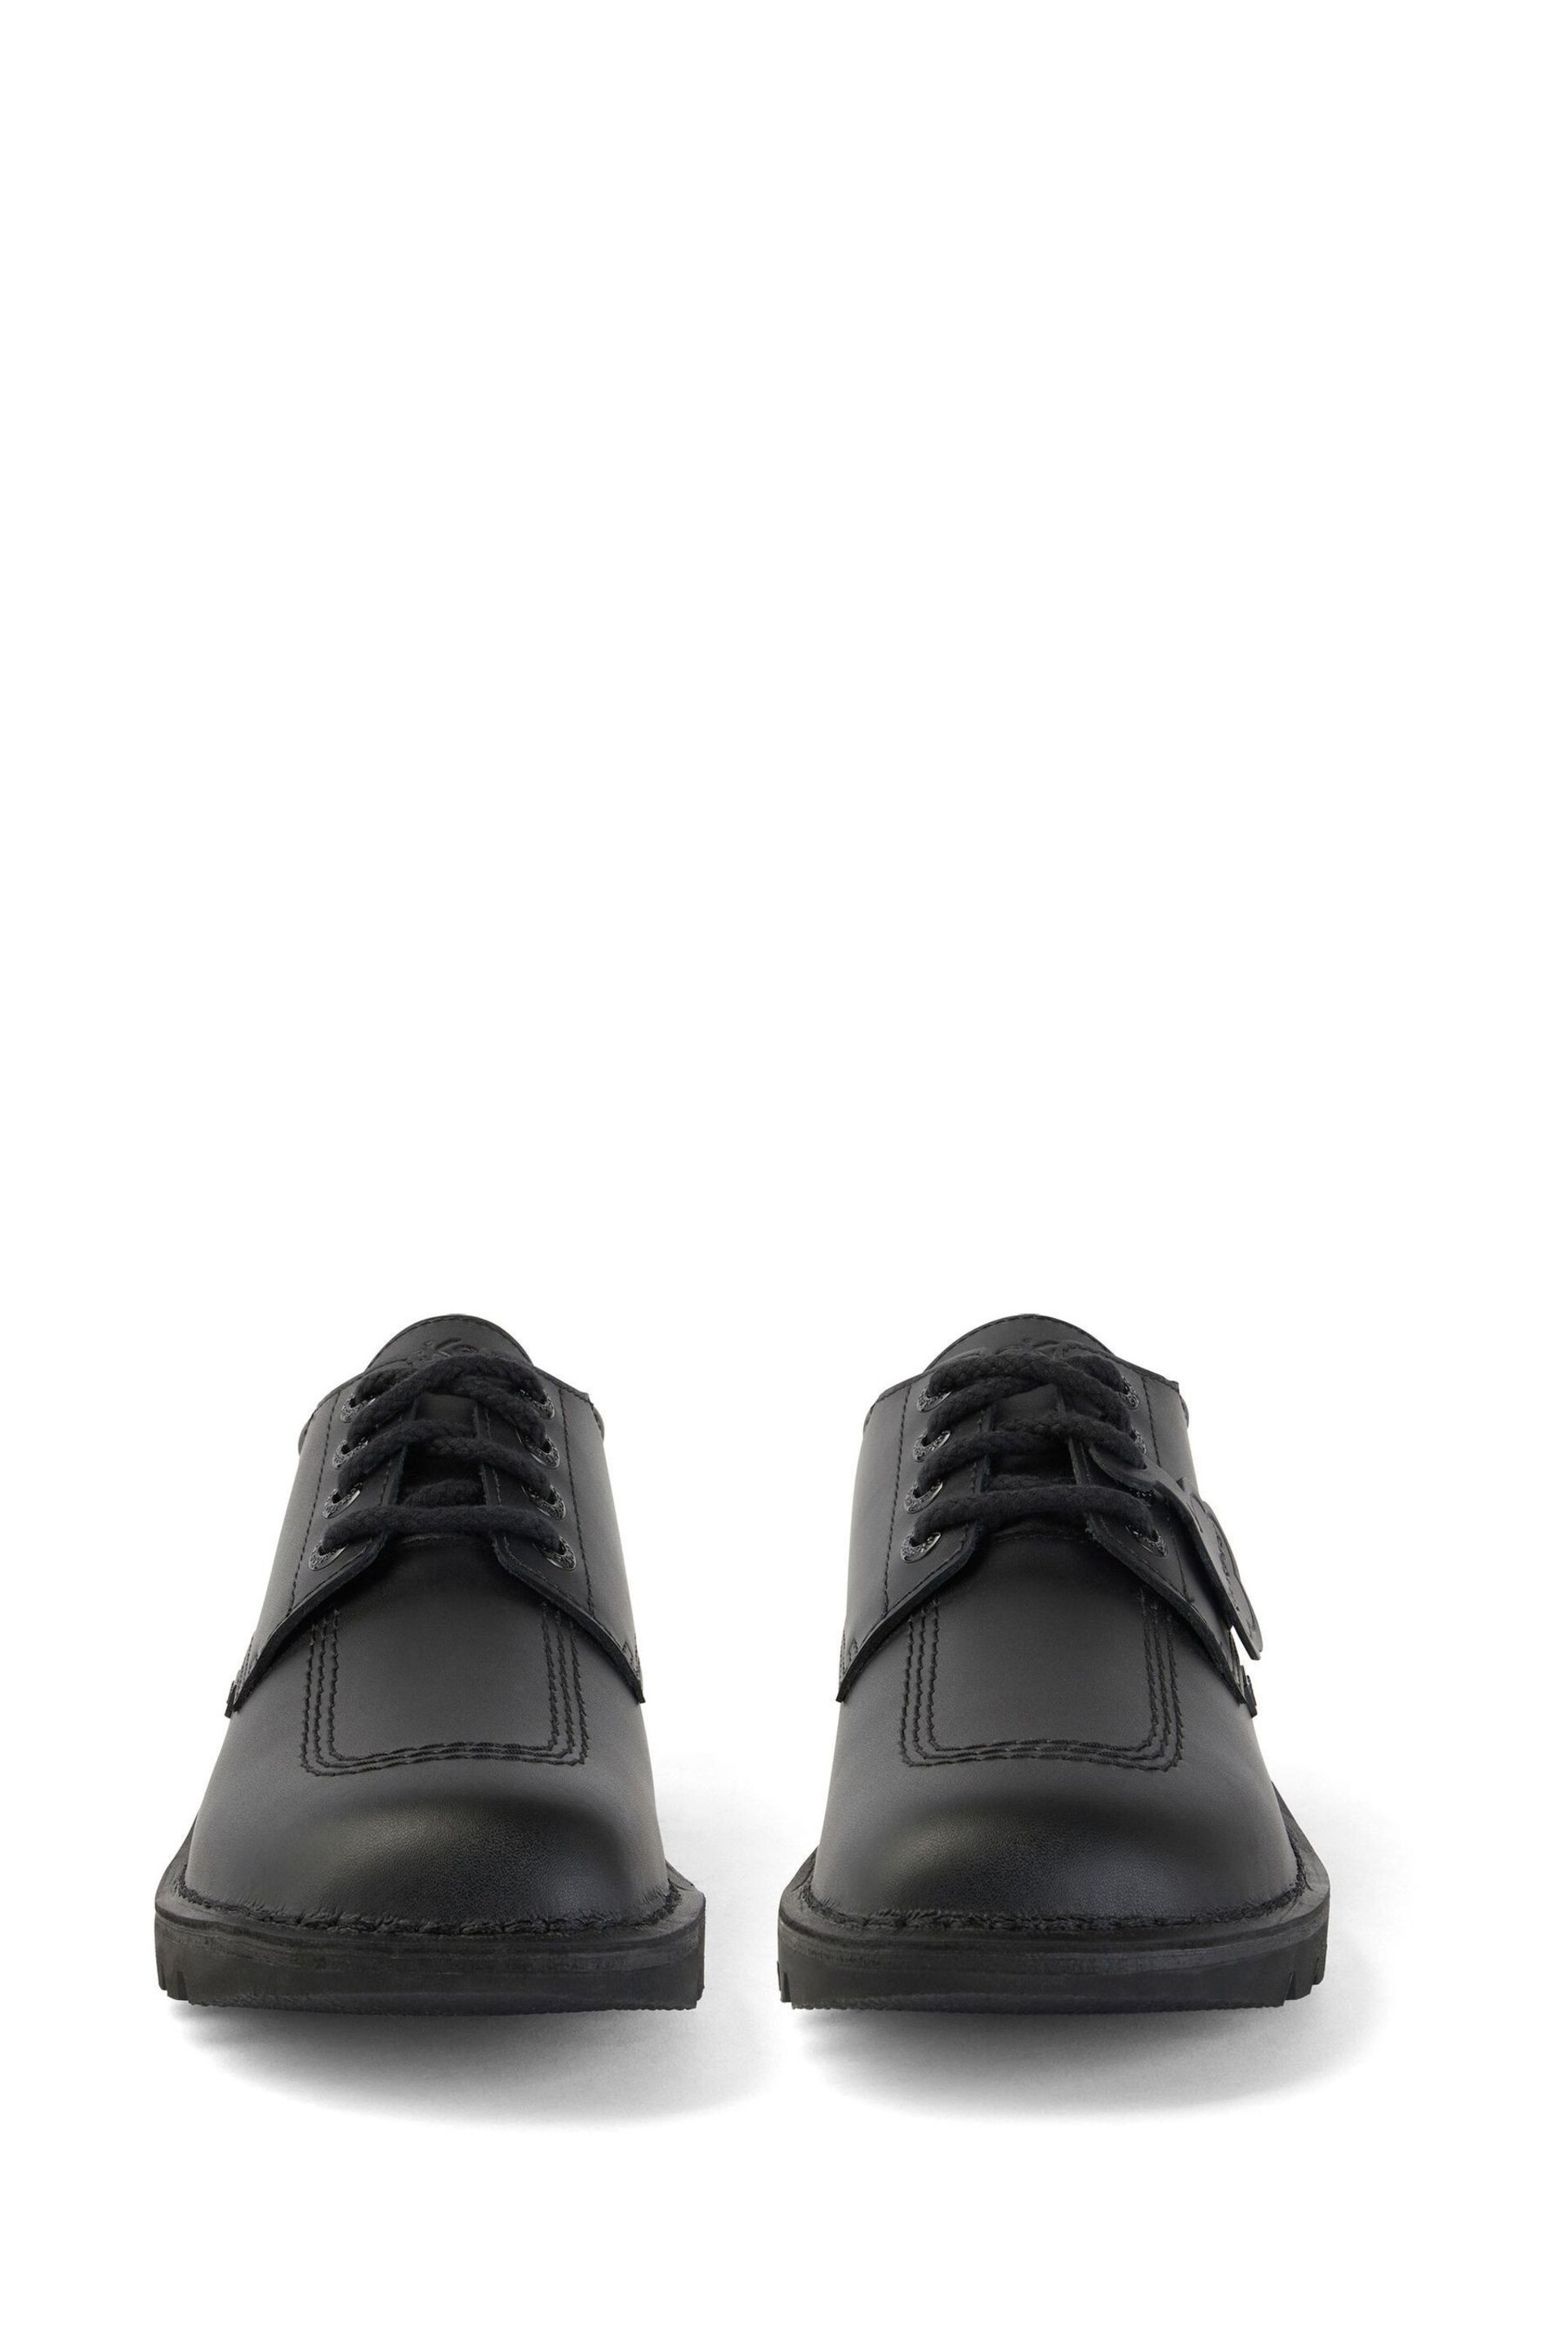 Kickers Kick Lo Padded Leather Shoes - Image 3 of 6